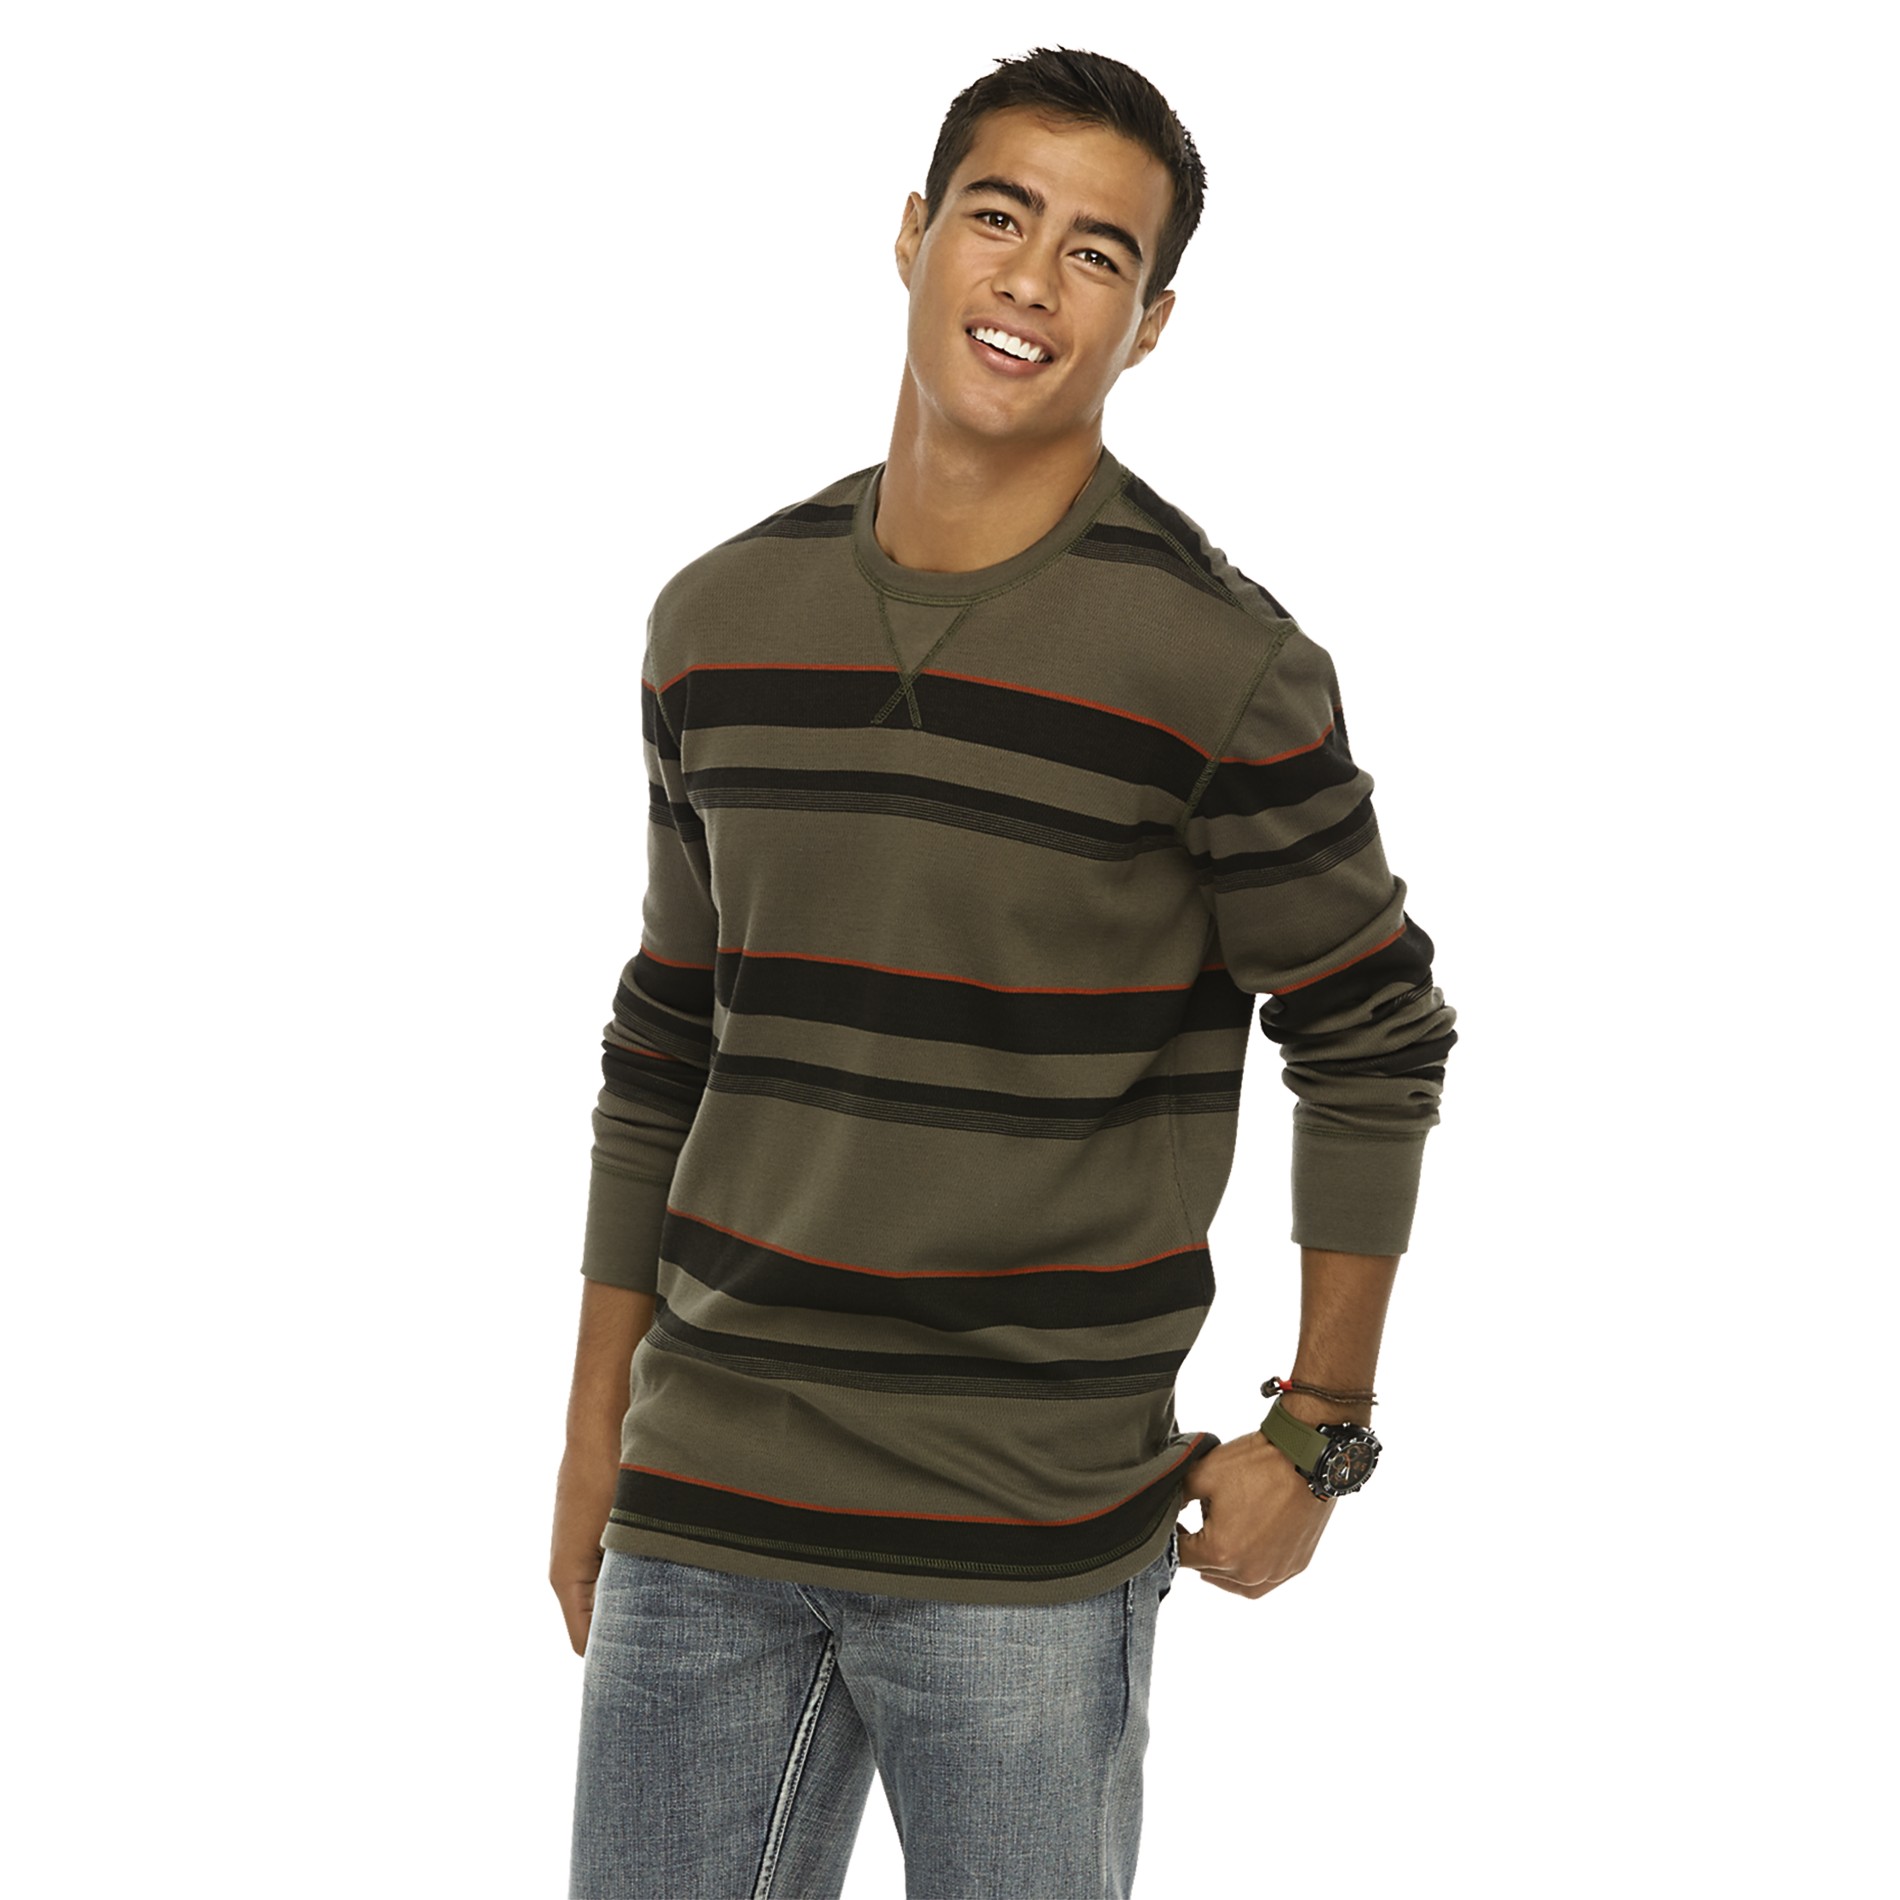 Route 66 Men's Thermal Shirt - Striped